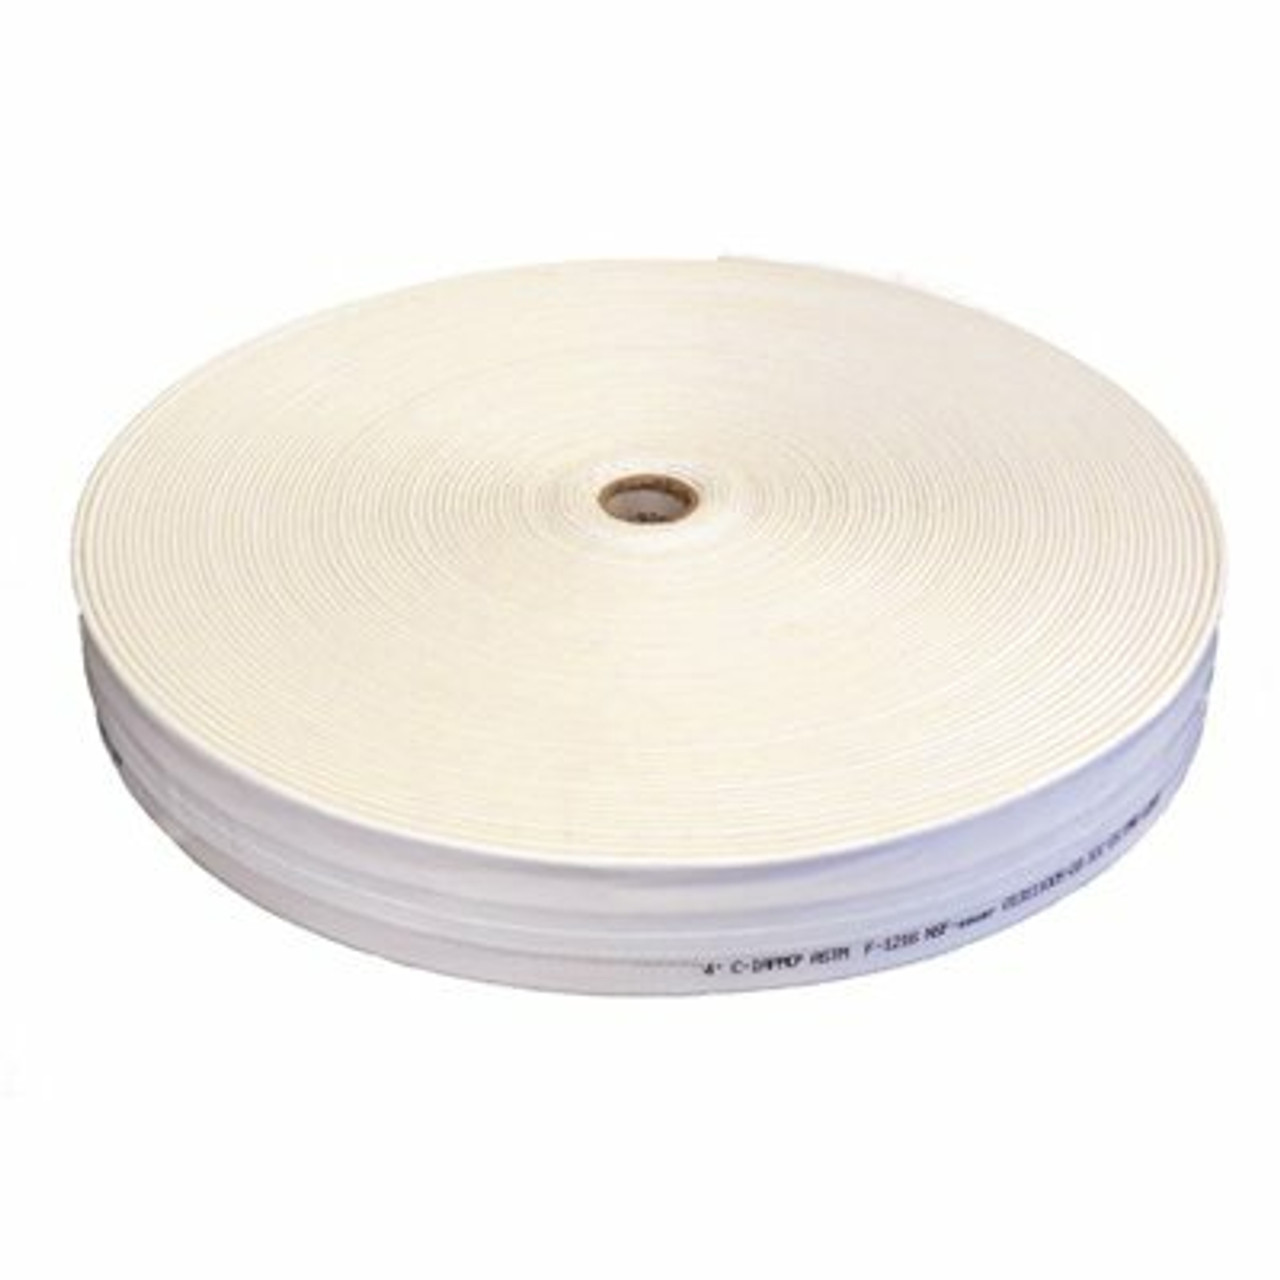 Transitional 5Mm Flex Liner - 3 In. - 4 In., 150 Ft. Roll